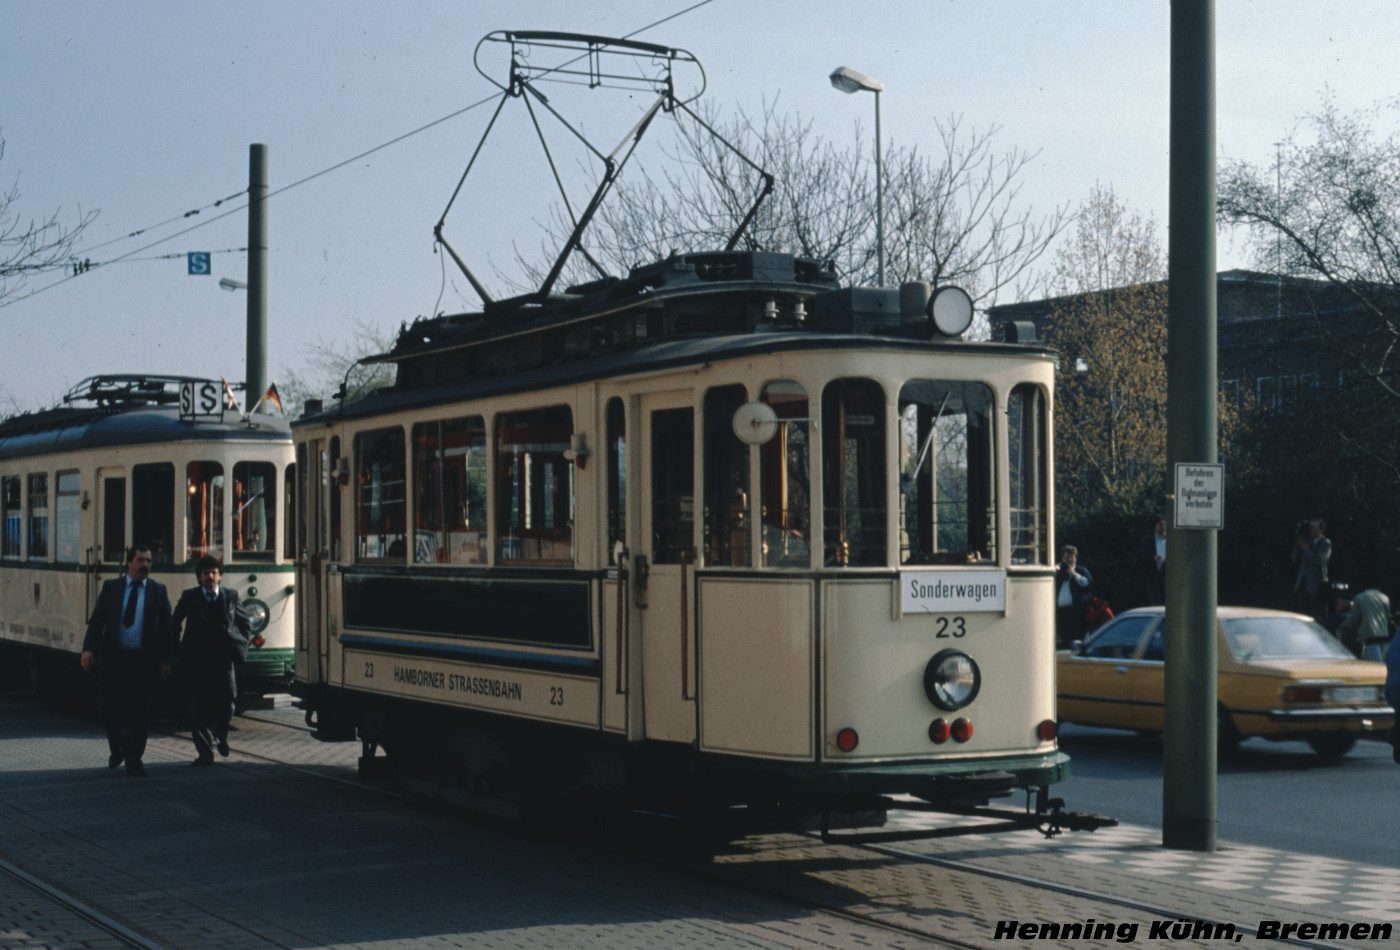 Duewag 2 axeled tram #23